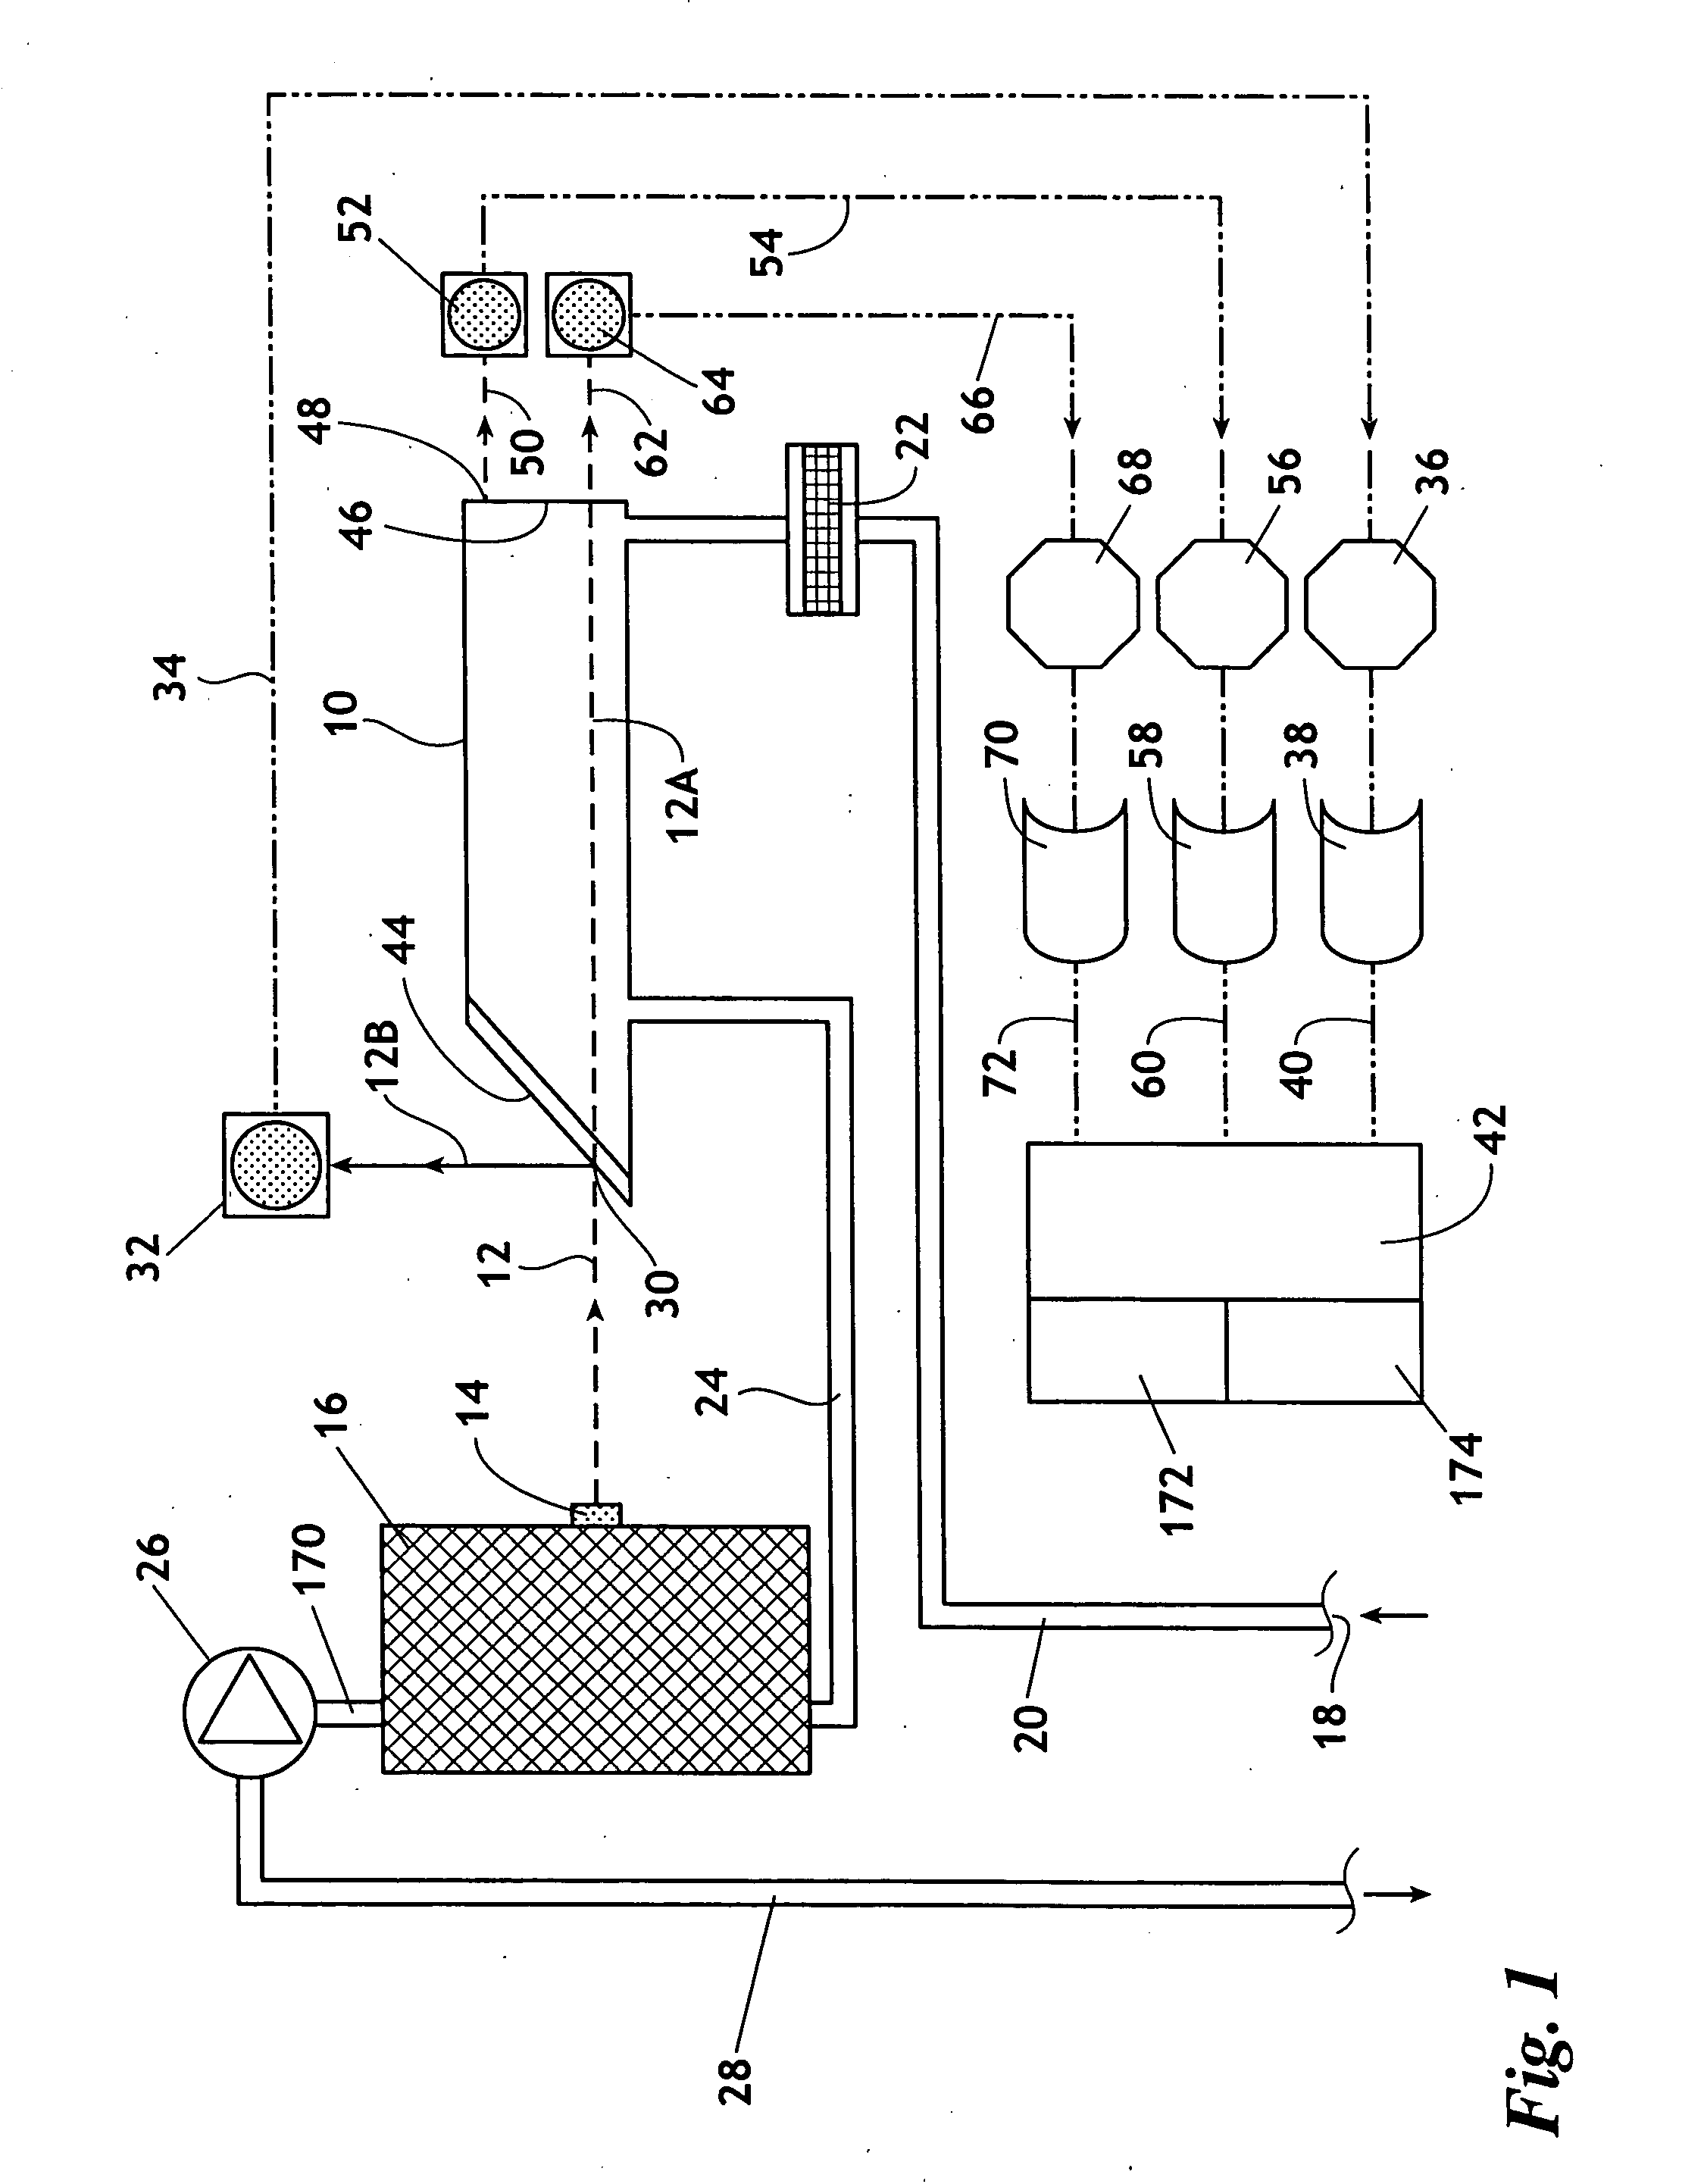 Method and device for detecting gases by absorption spectroscopy